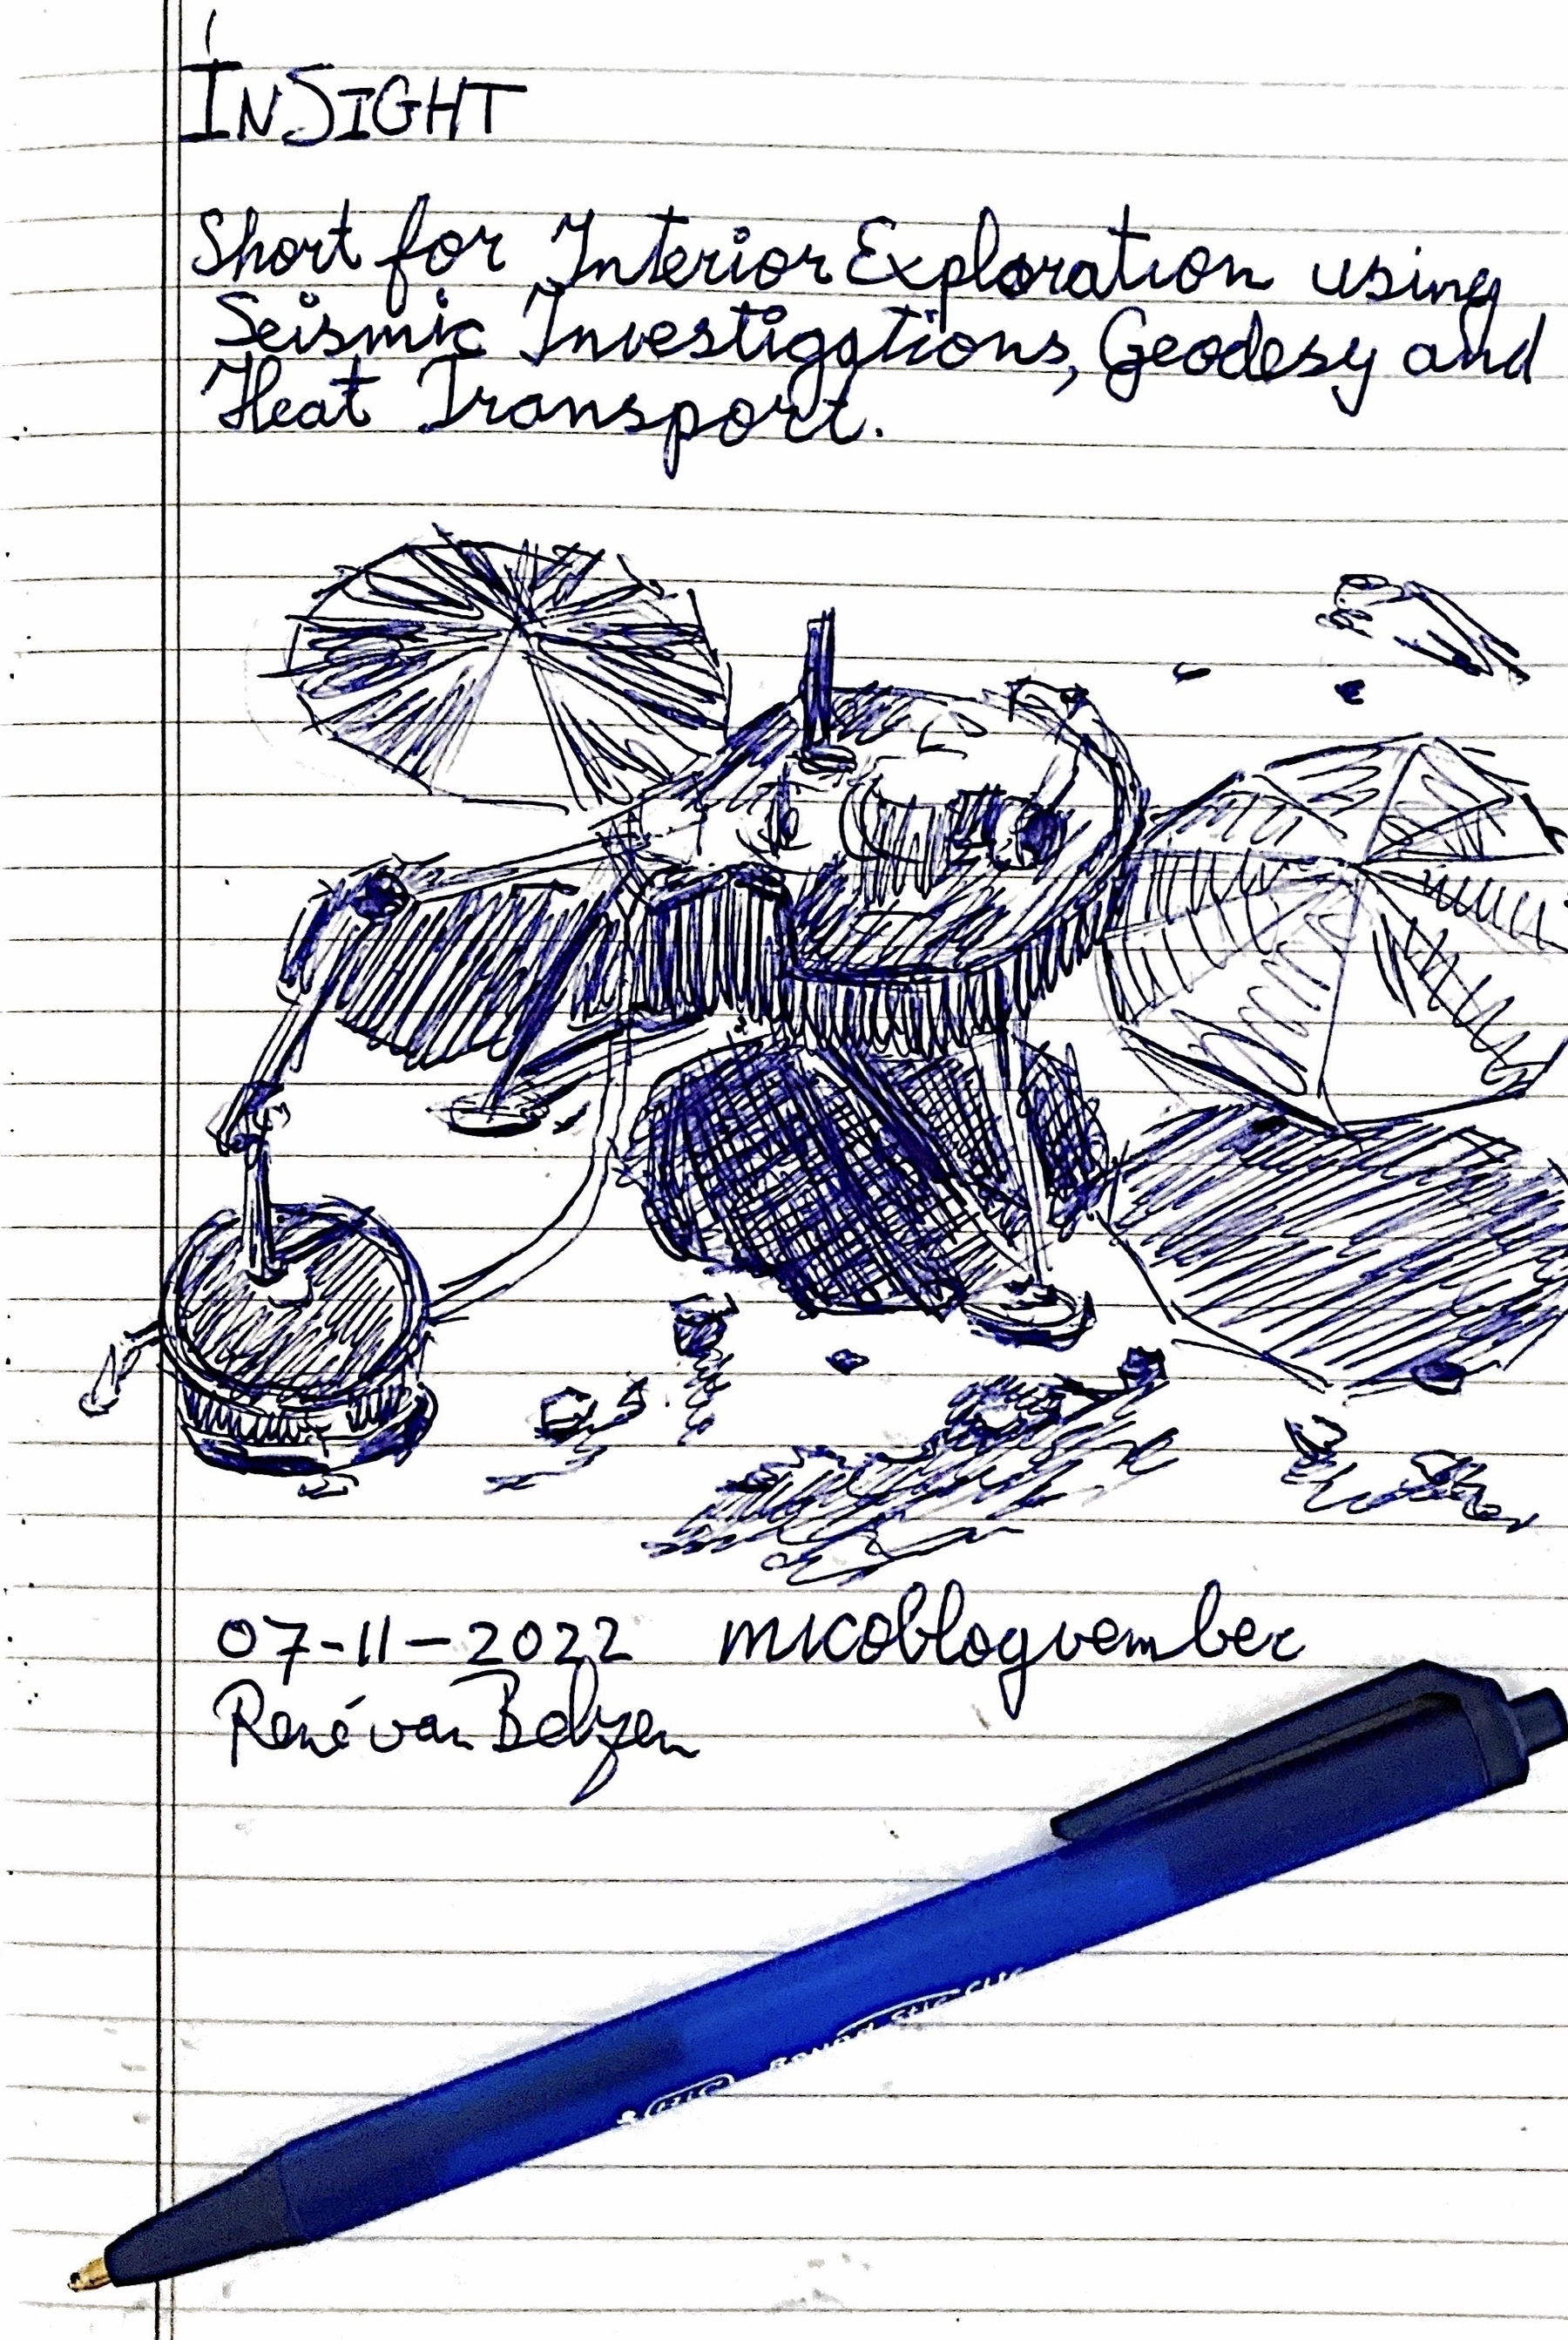 ballpoint sketch note of the InSight lander for the planet Mars